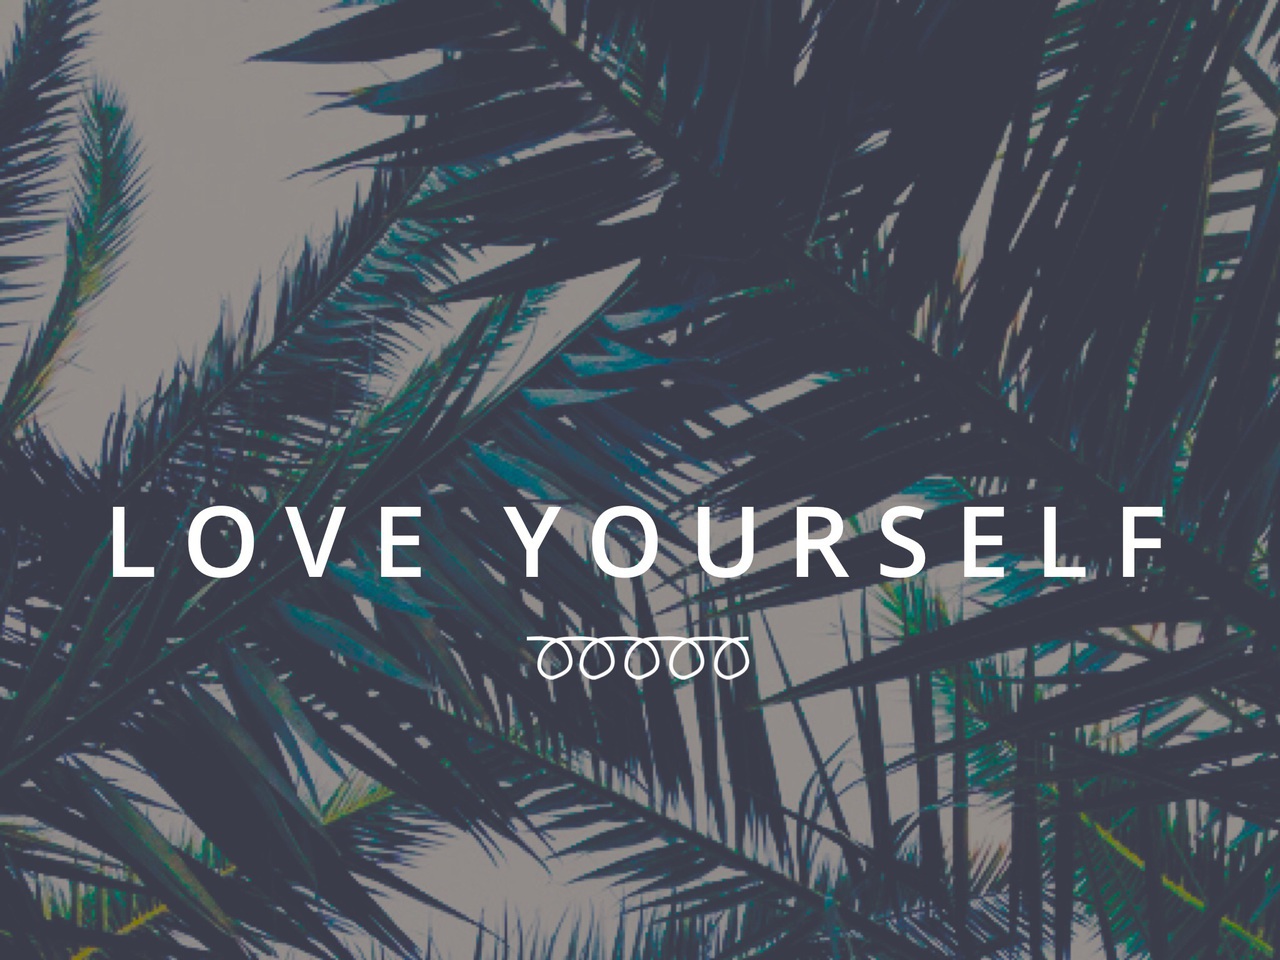 Love Yourself, Yourself, And Quotes Image - Love Yourself Quotes Hd -  1280x960 Wallpaper 